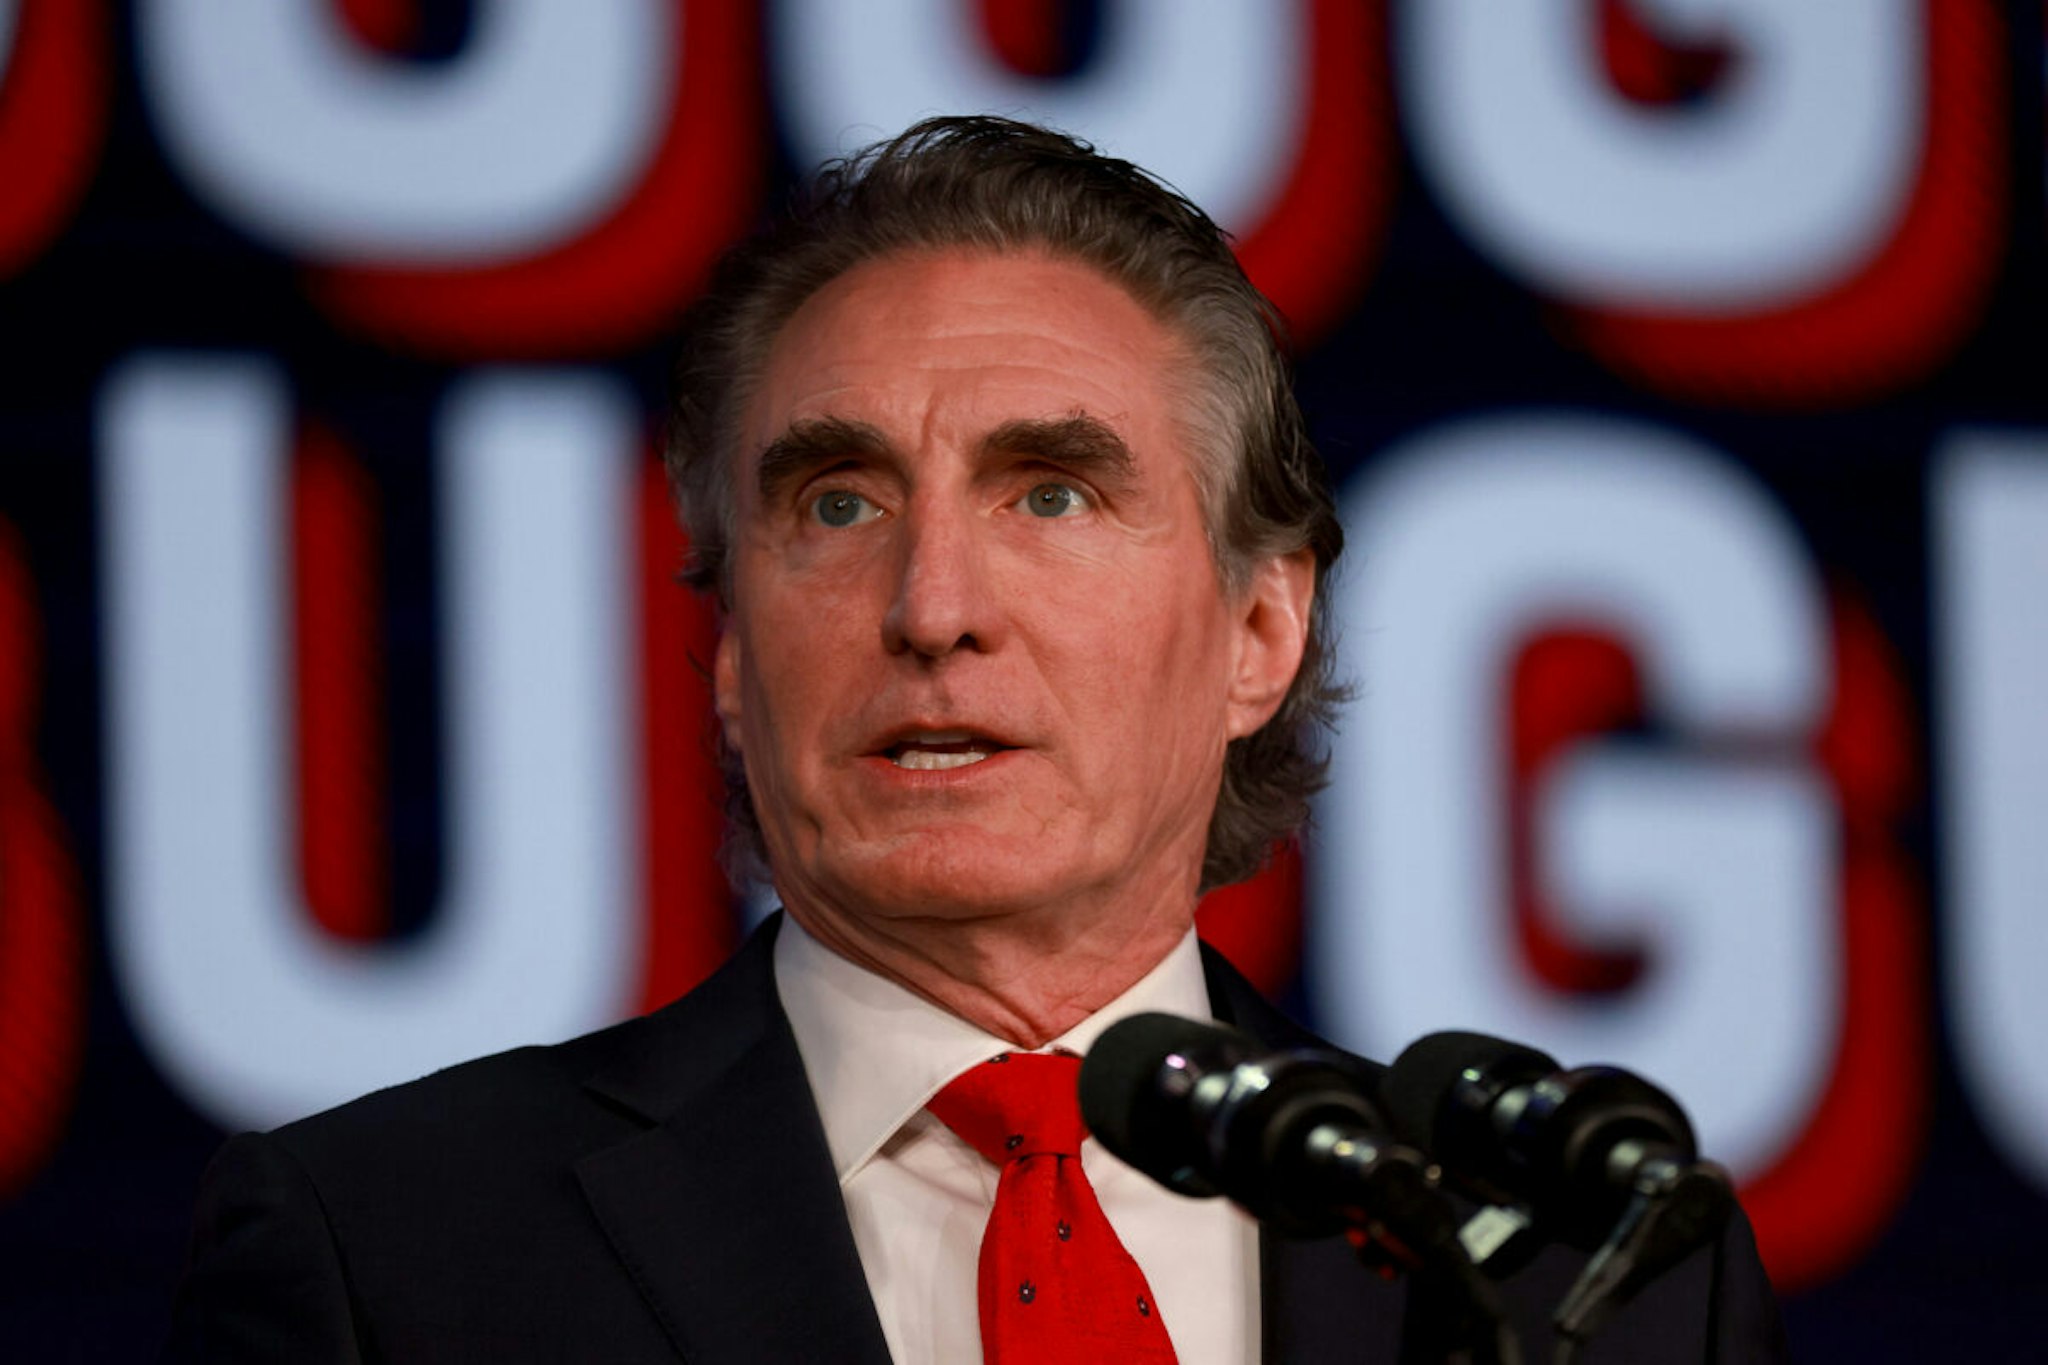 Republican presidential candidate North Dakota Governor Doug Burgum speaks during the Florida Freedom Summit held at the Gaylord Palms Resort on November 04, 2023 in Kissimmee, Florida.